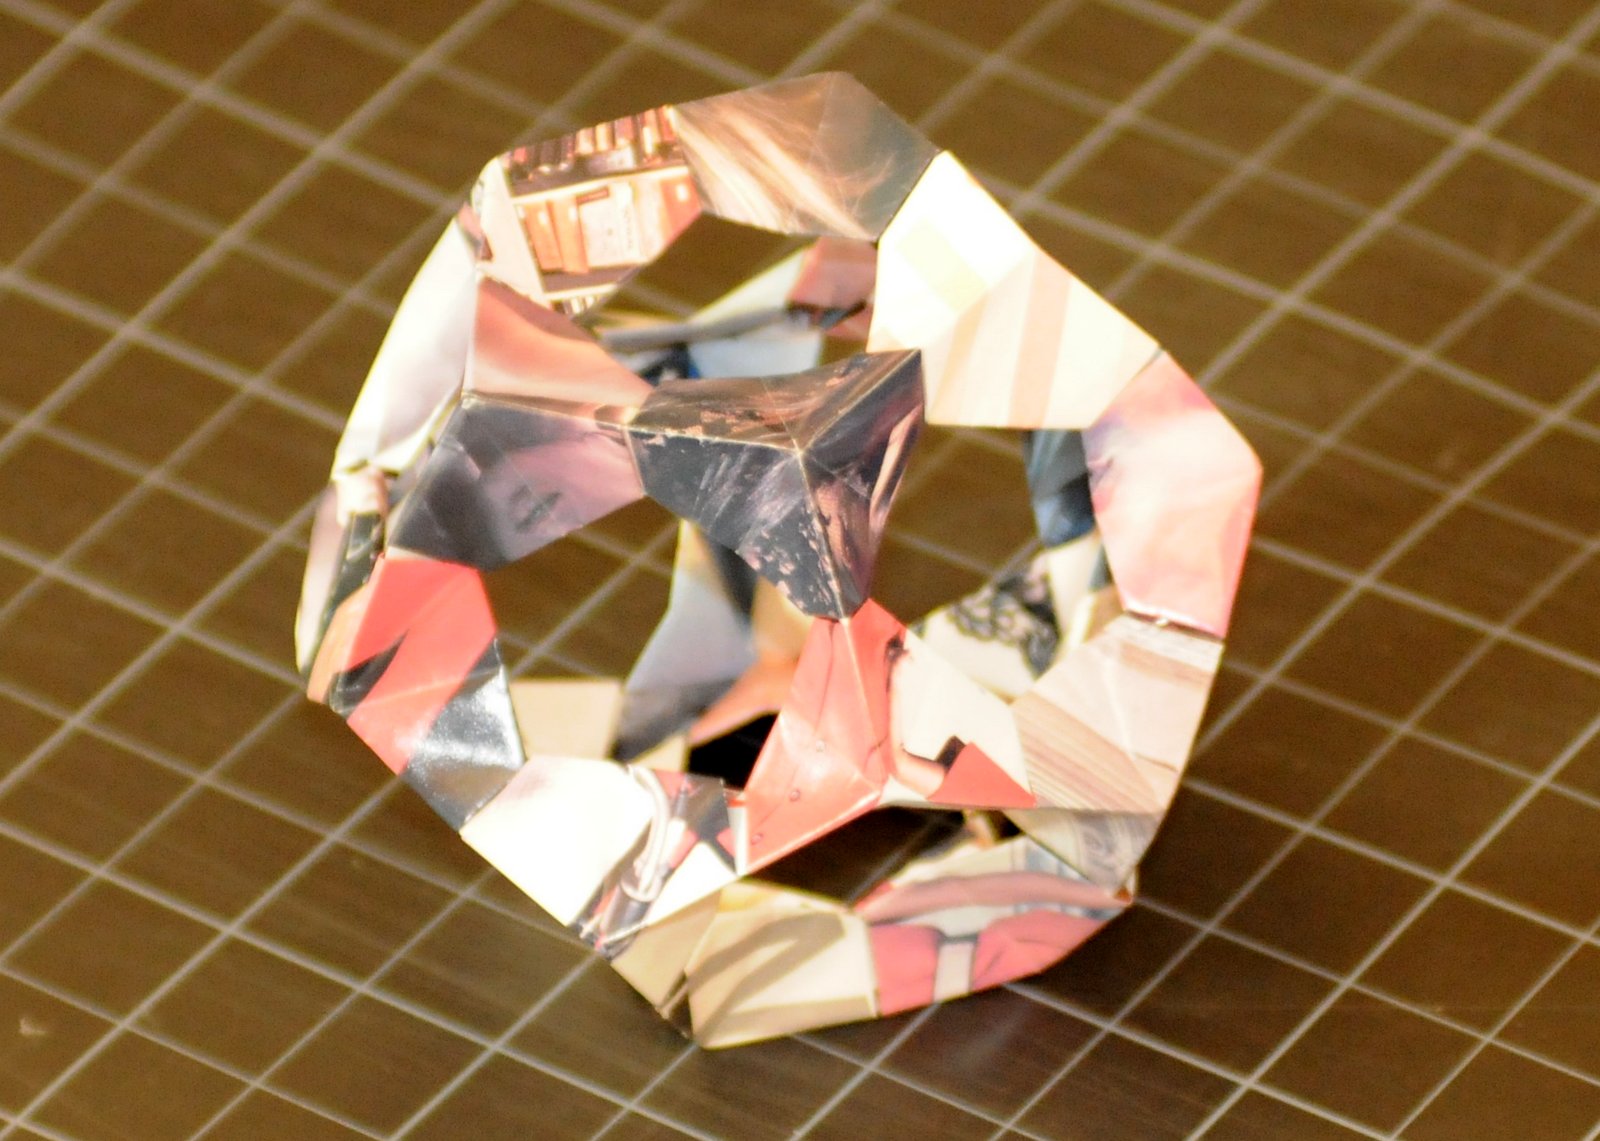 a hollow dodecahedron made of folded paper